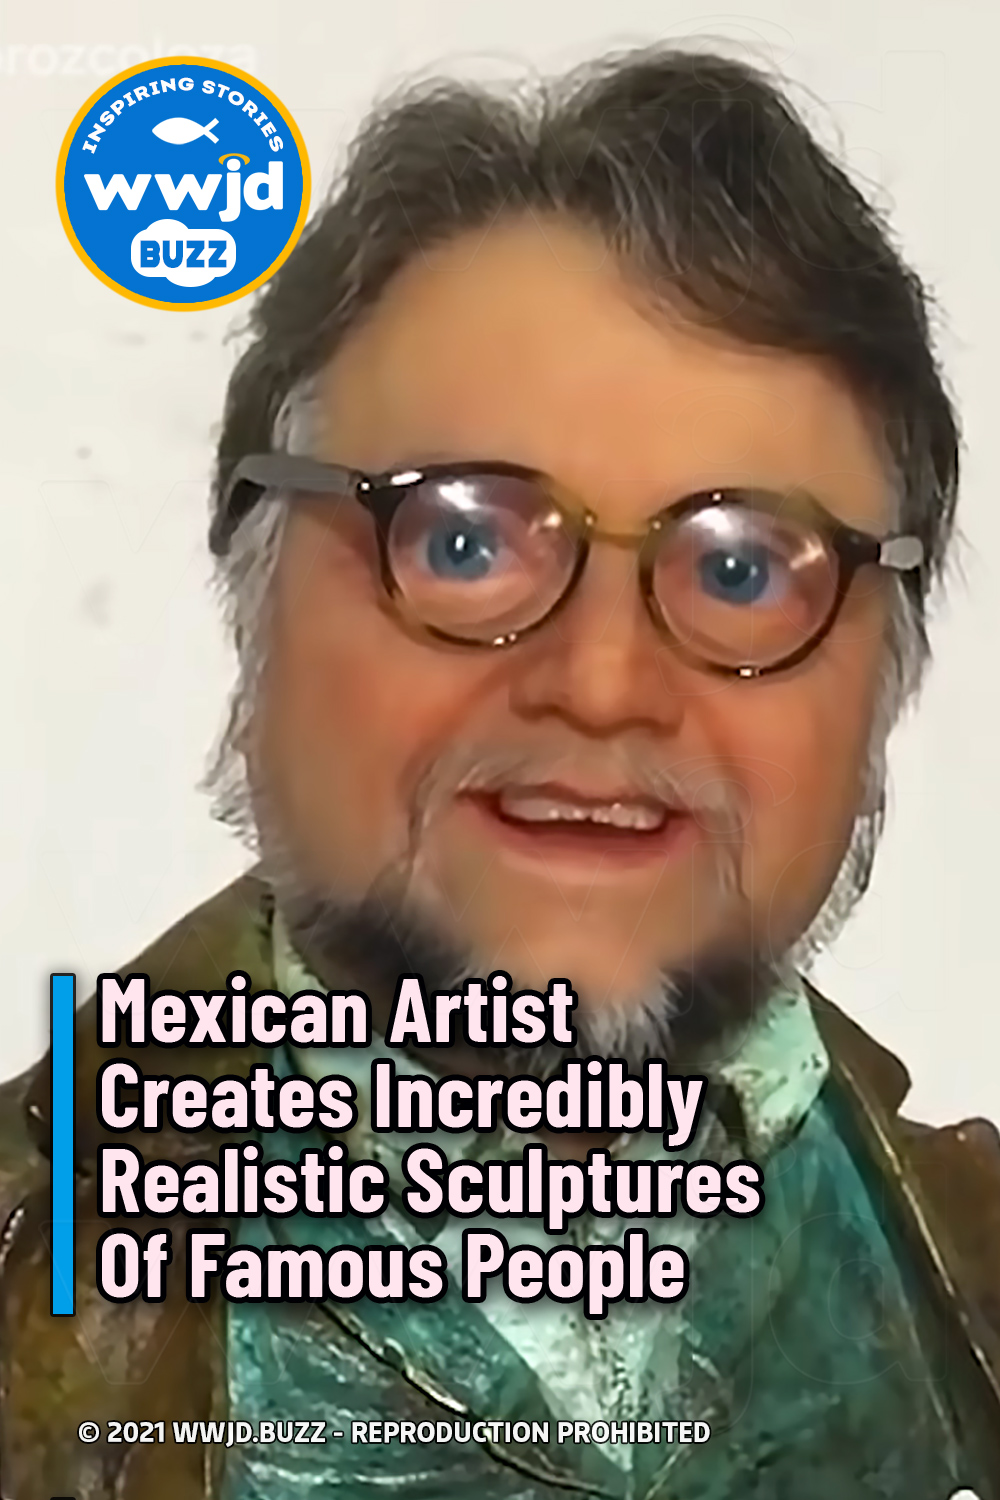 Mexican Artist Creates Incredibly Realistic Sculptures Of Famous People